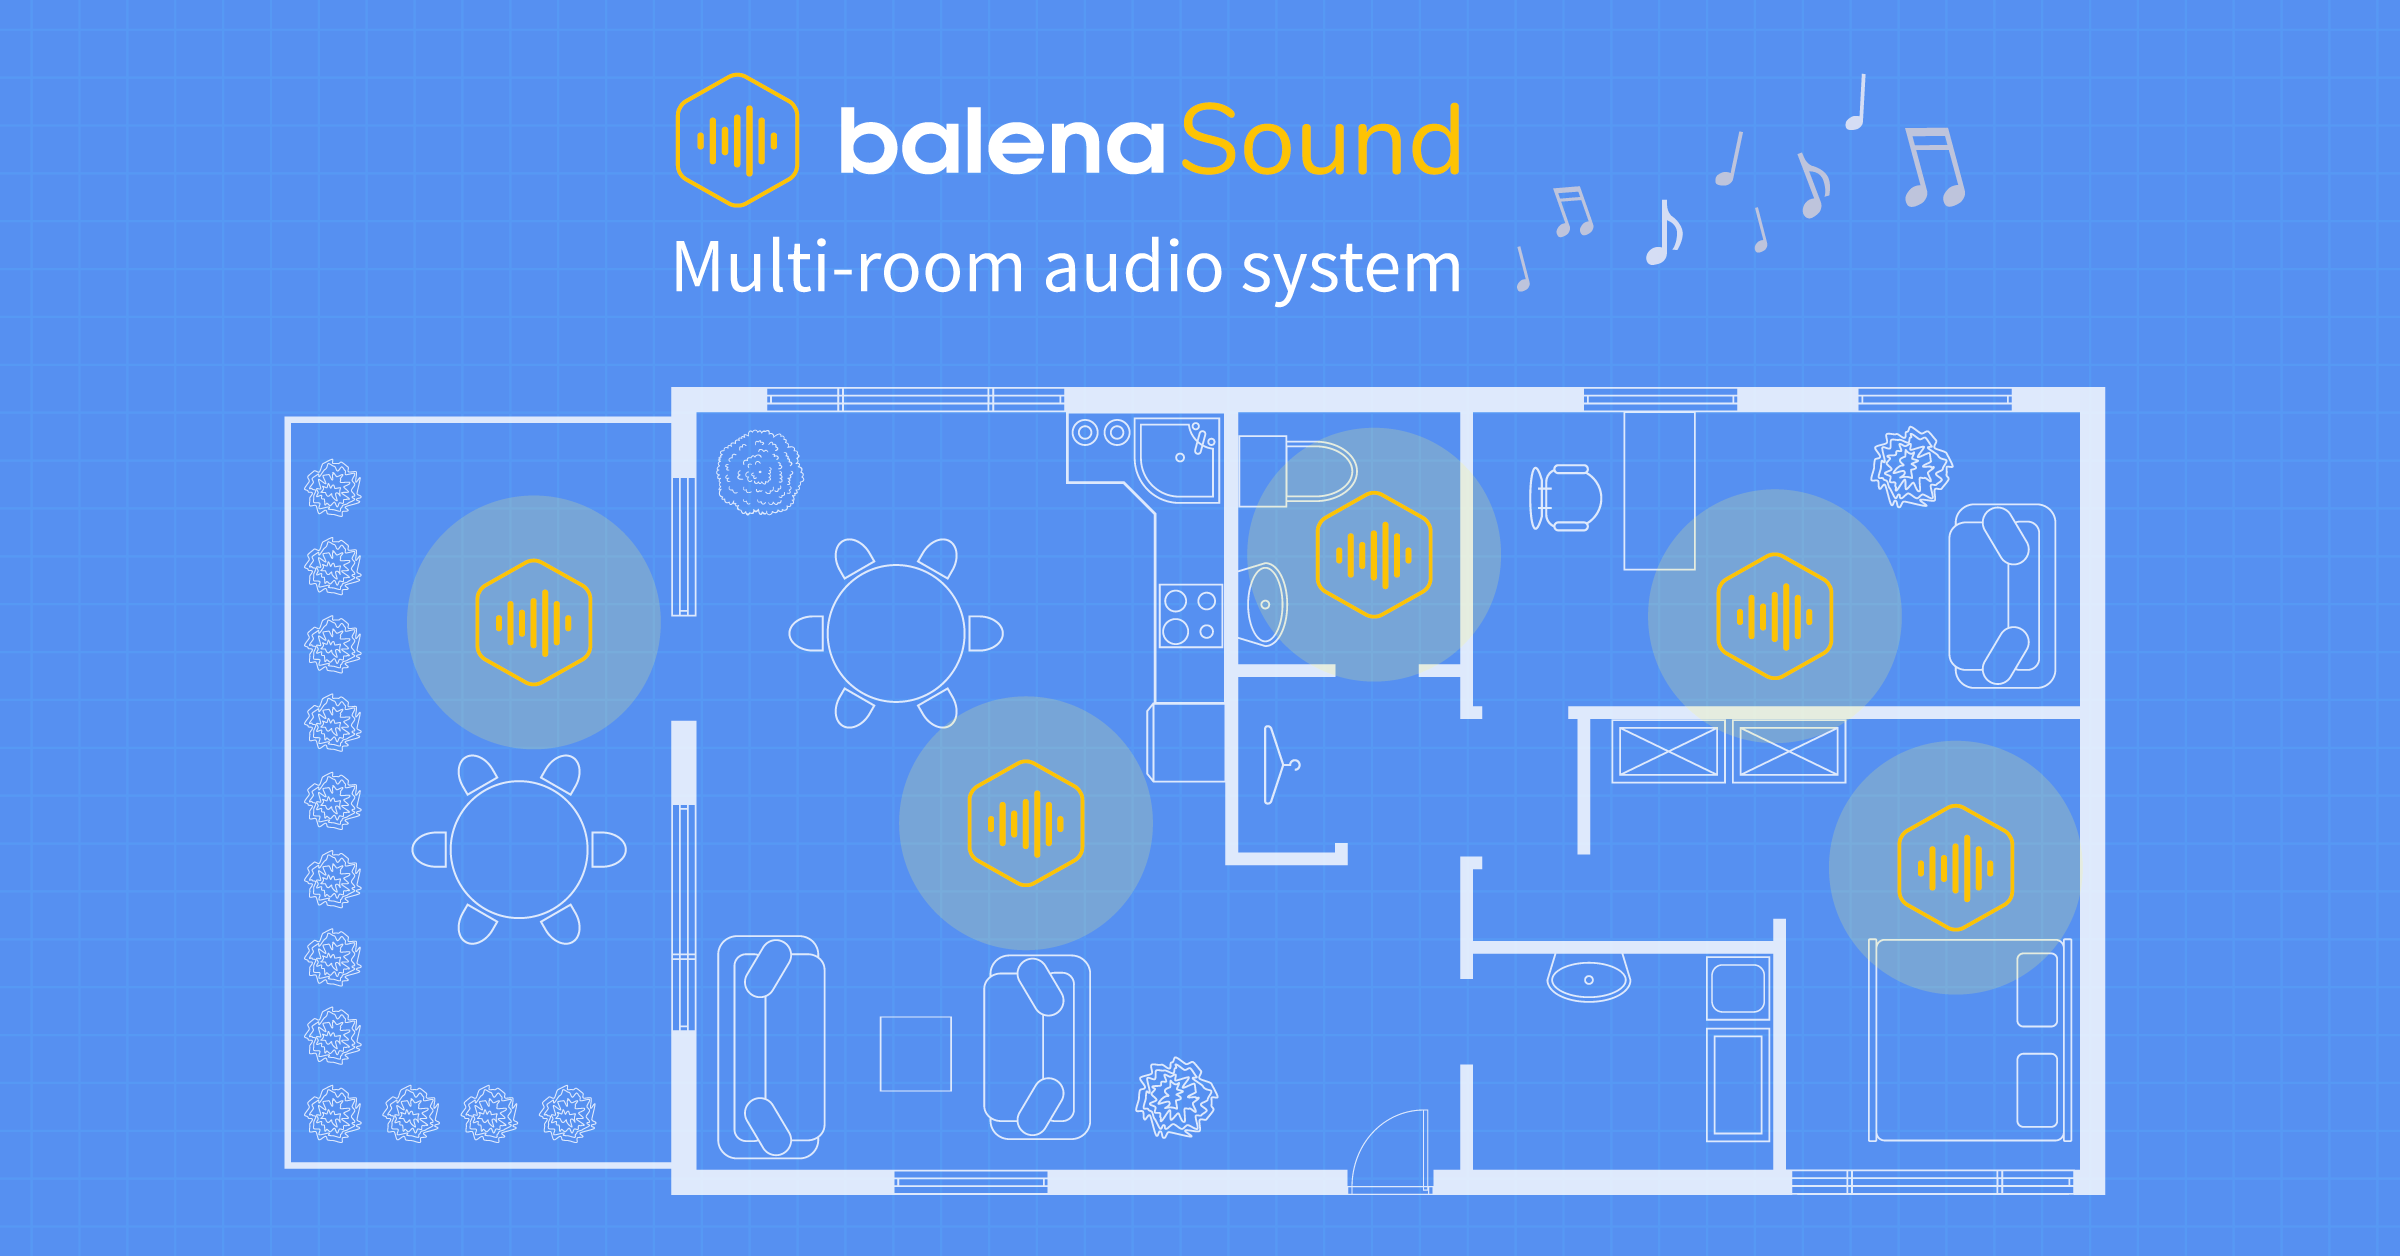 Build your own multi-room audio system with Bluetooth, Airplay, and Spotify using Raspberry Pis